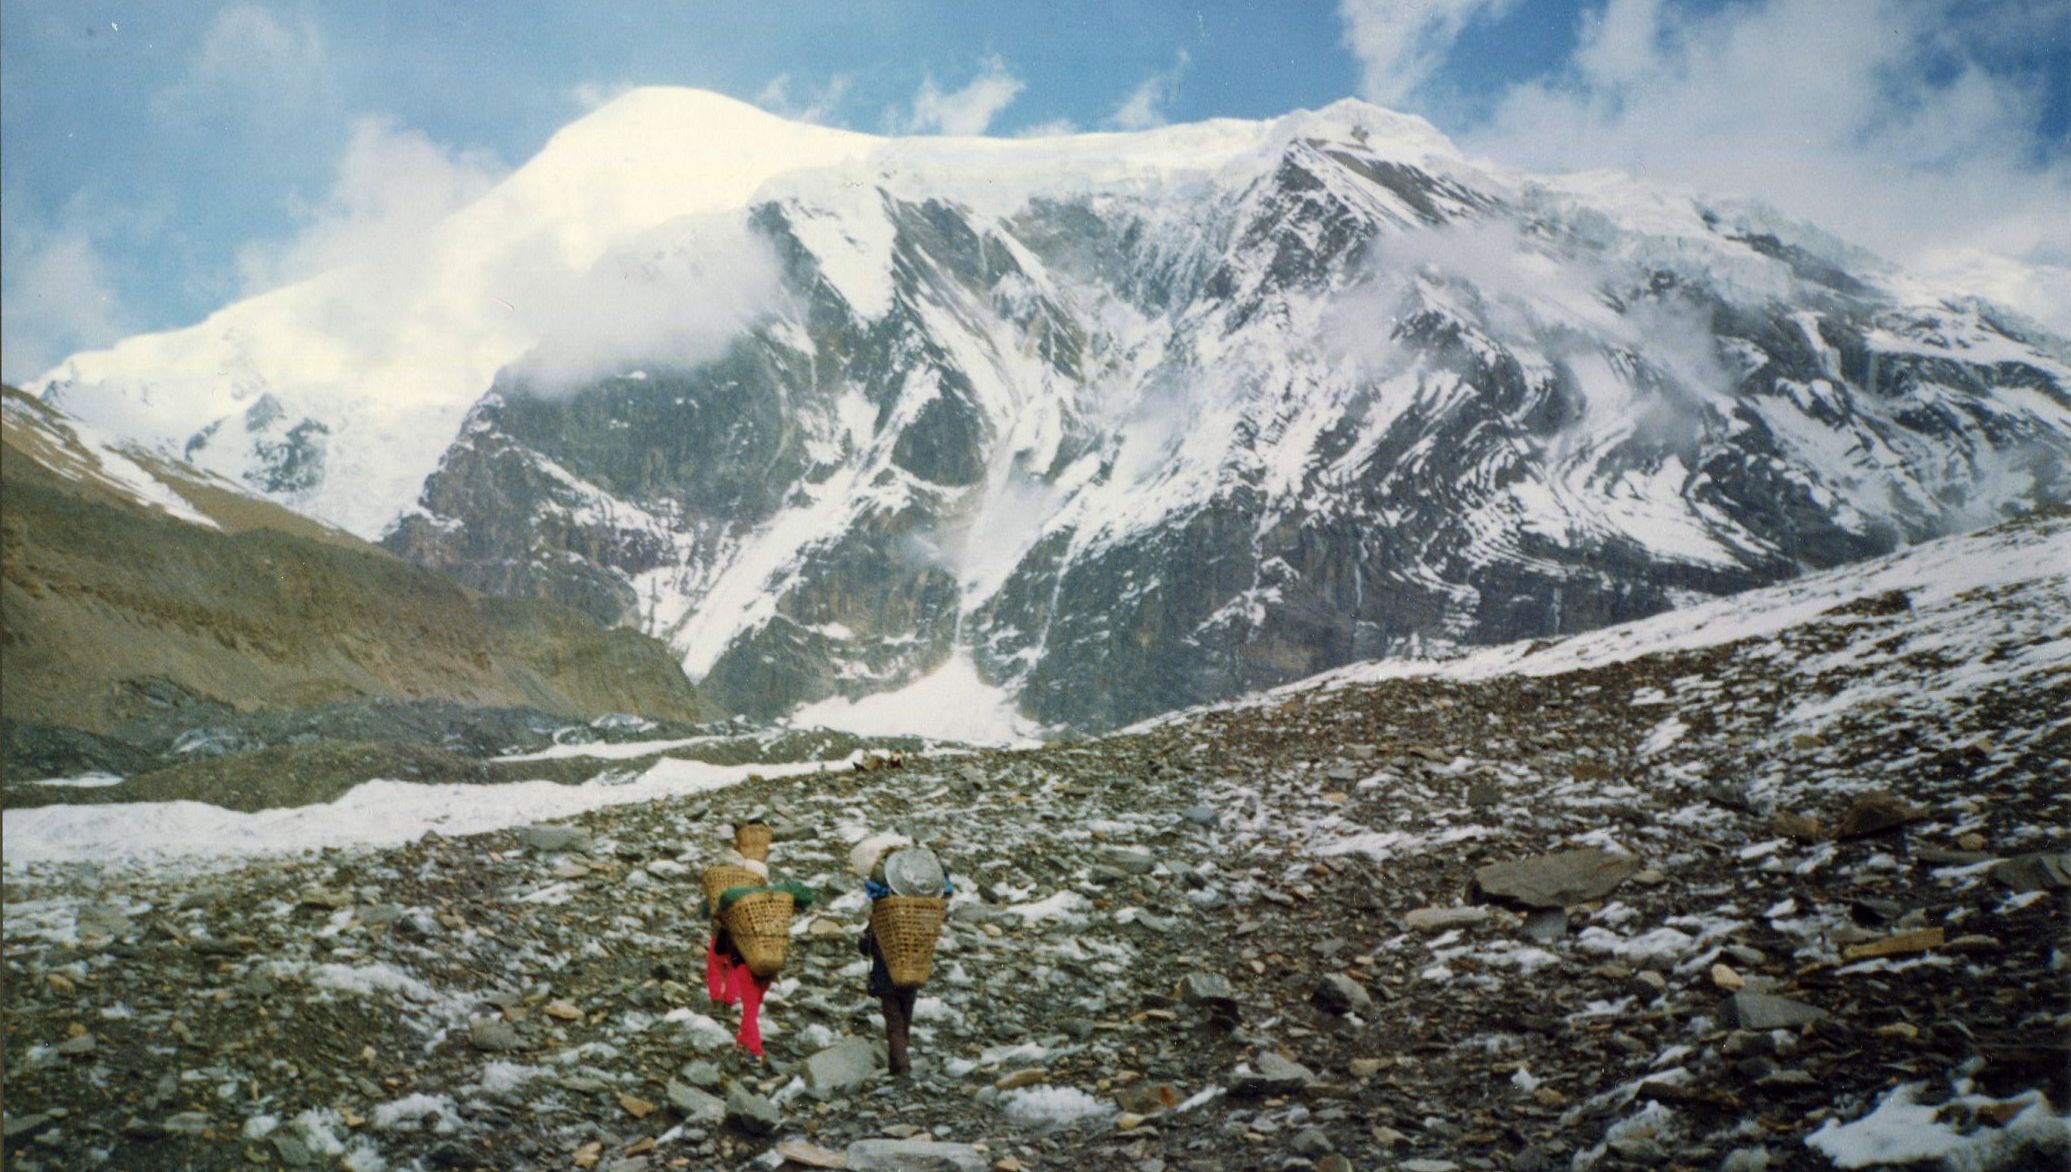 Tukuche Peak ( 6920m ) from Chonbarden Glacier on approach to Dhaulagiri Base Camp